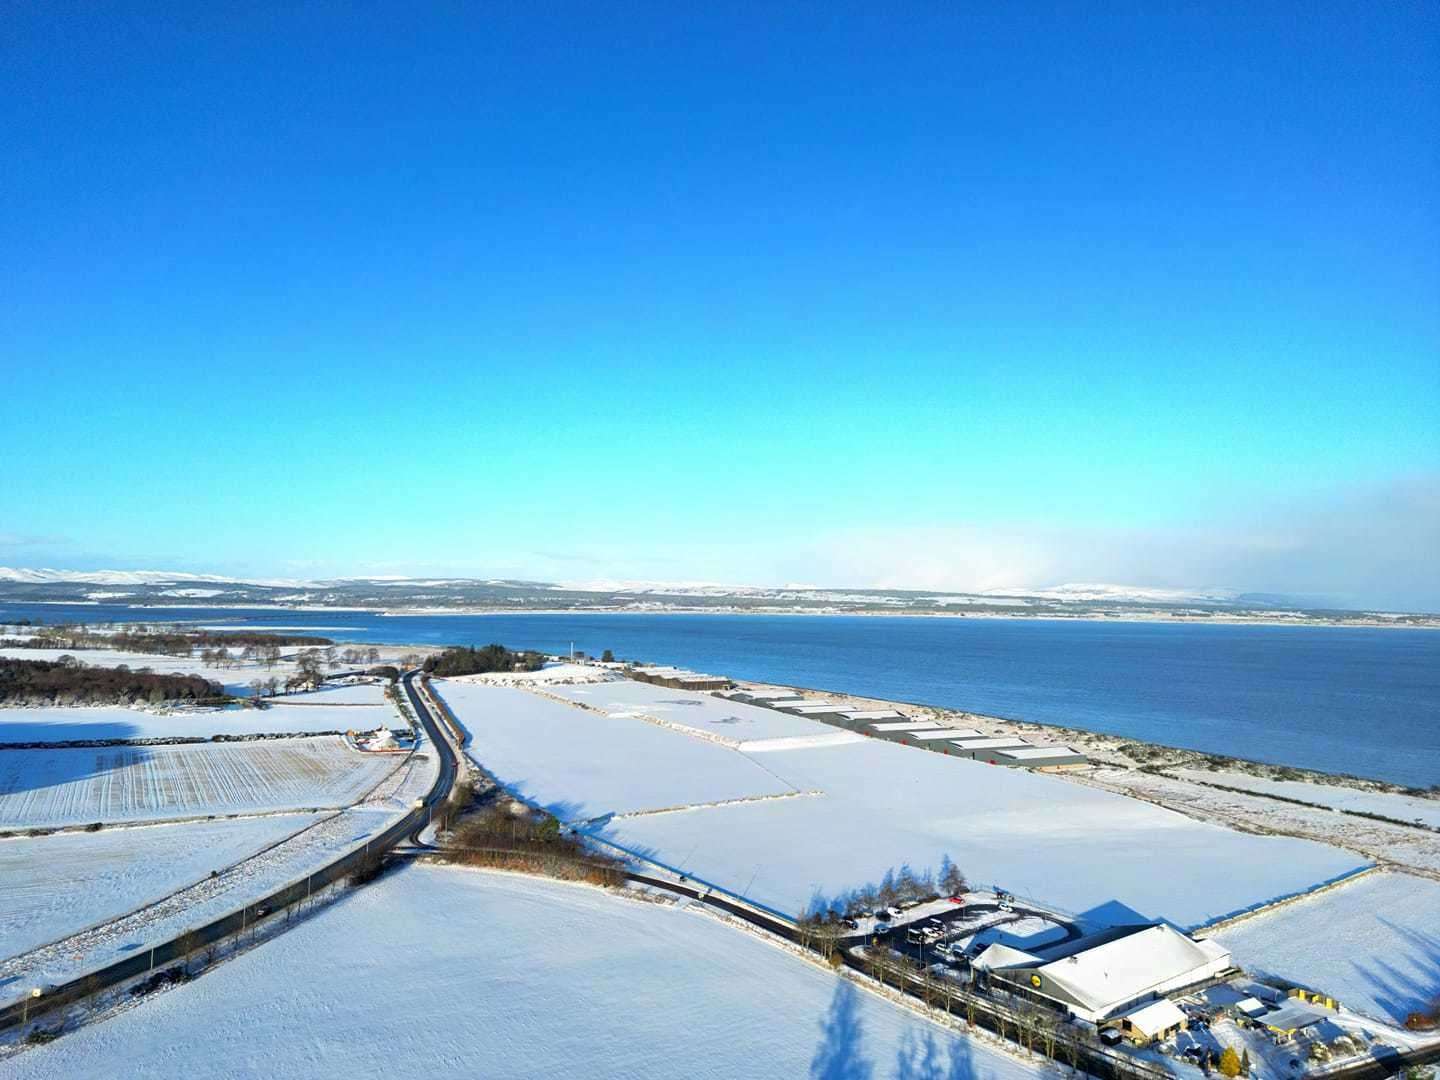 Looking across the water to Dornoch and Embo. Photo: John Gregory